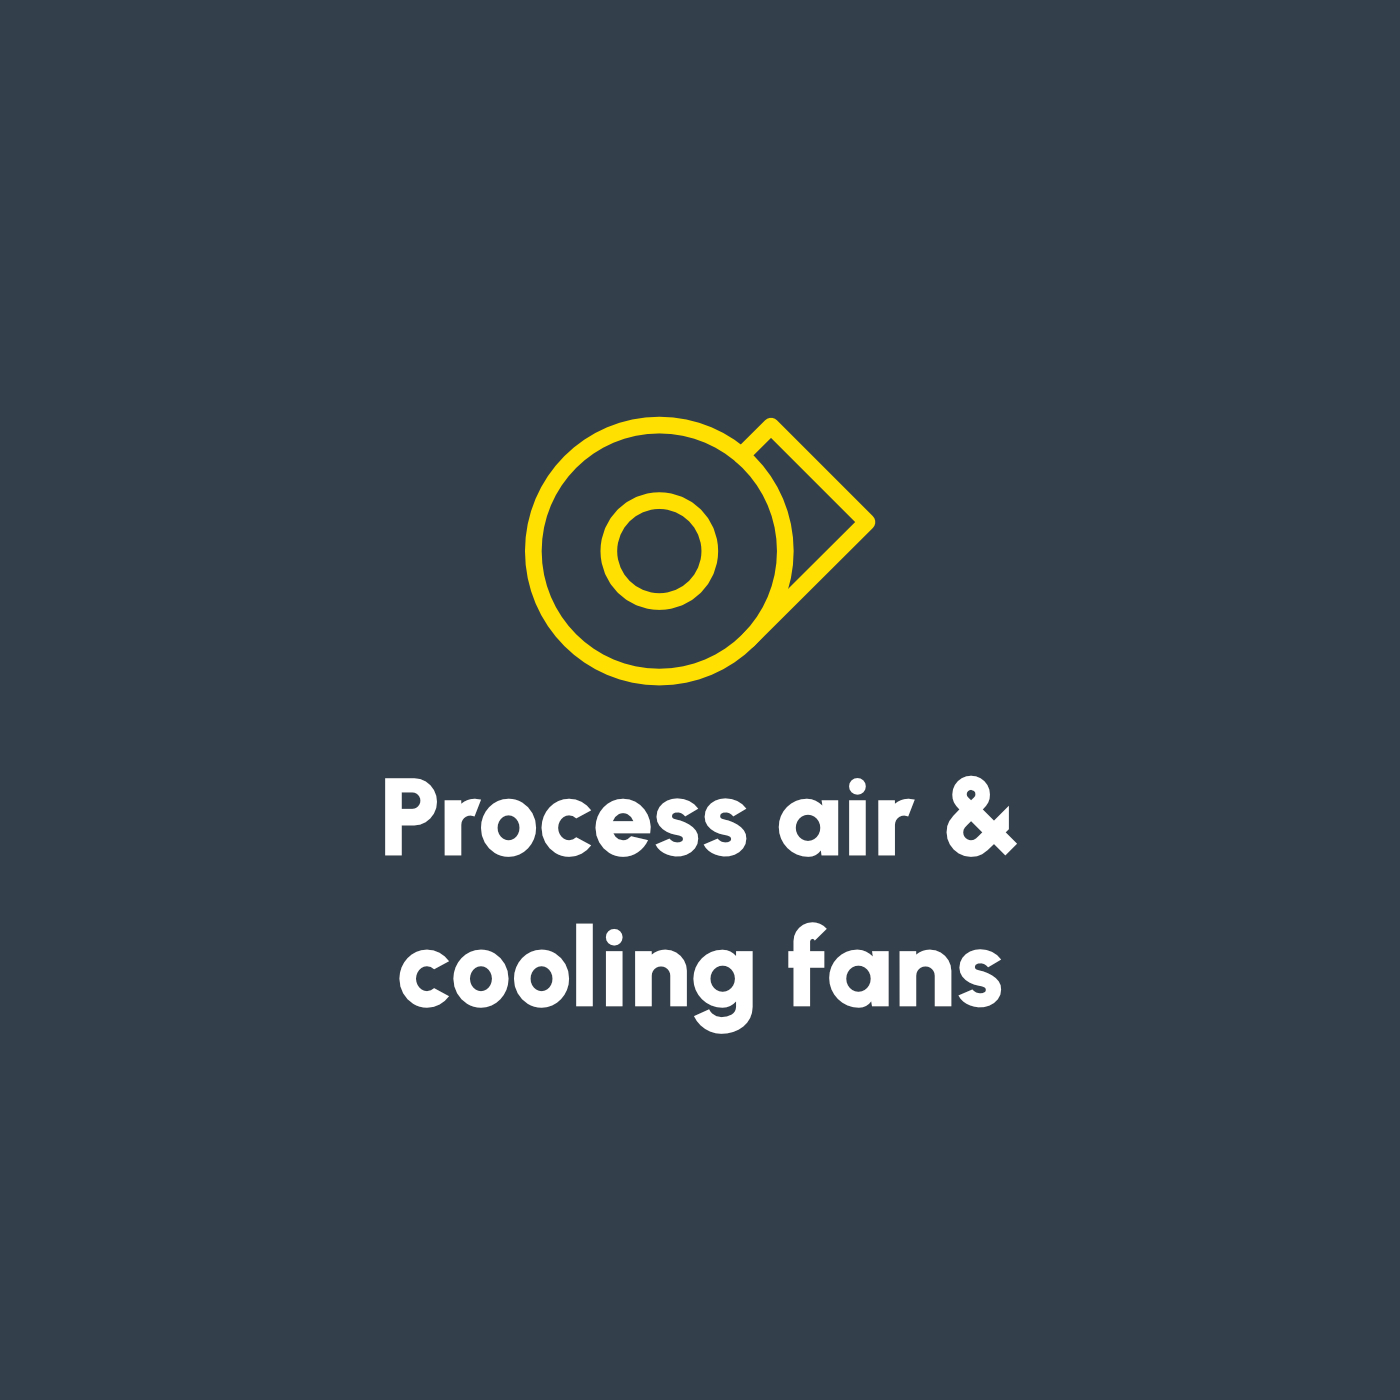 Process air & cooling fans